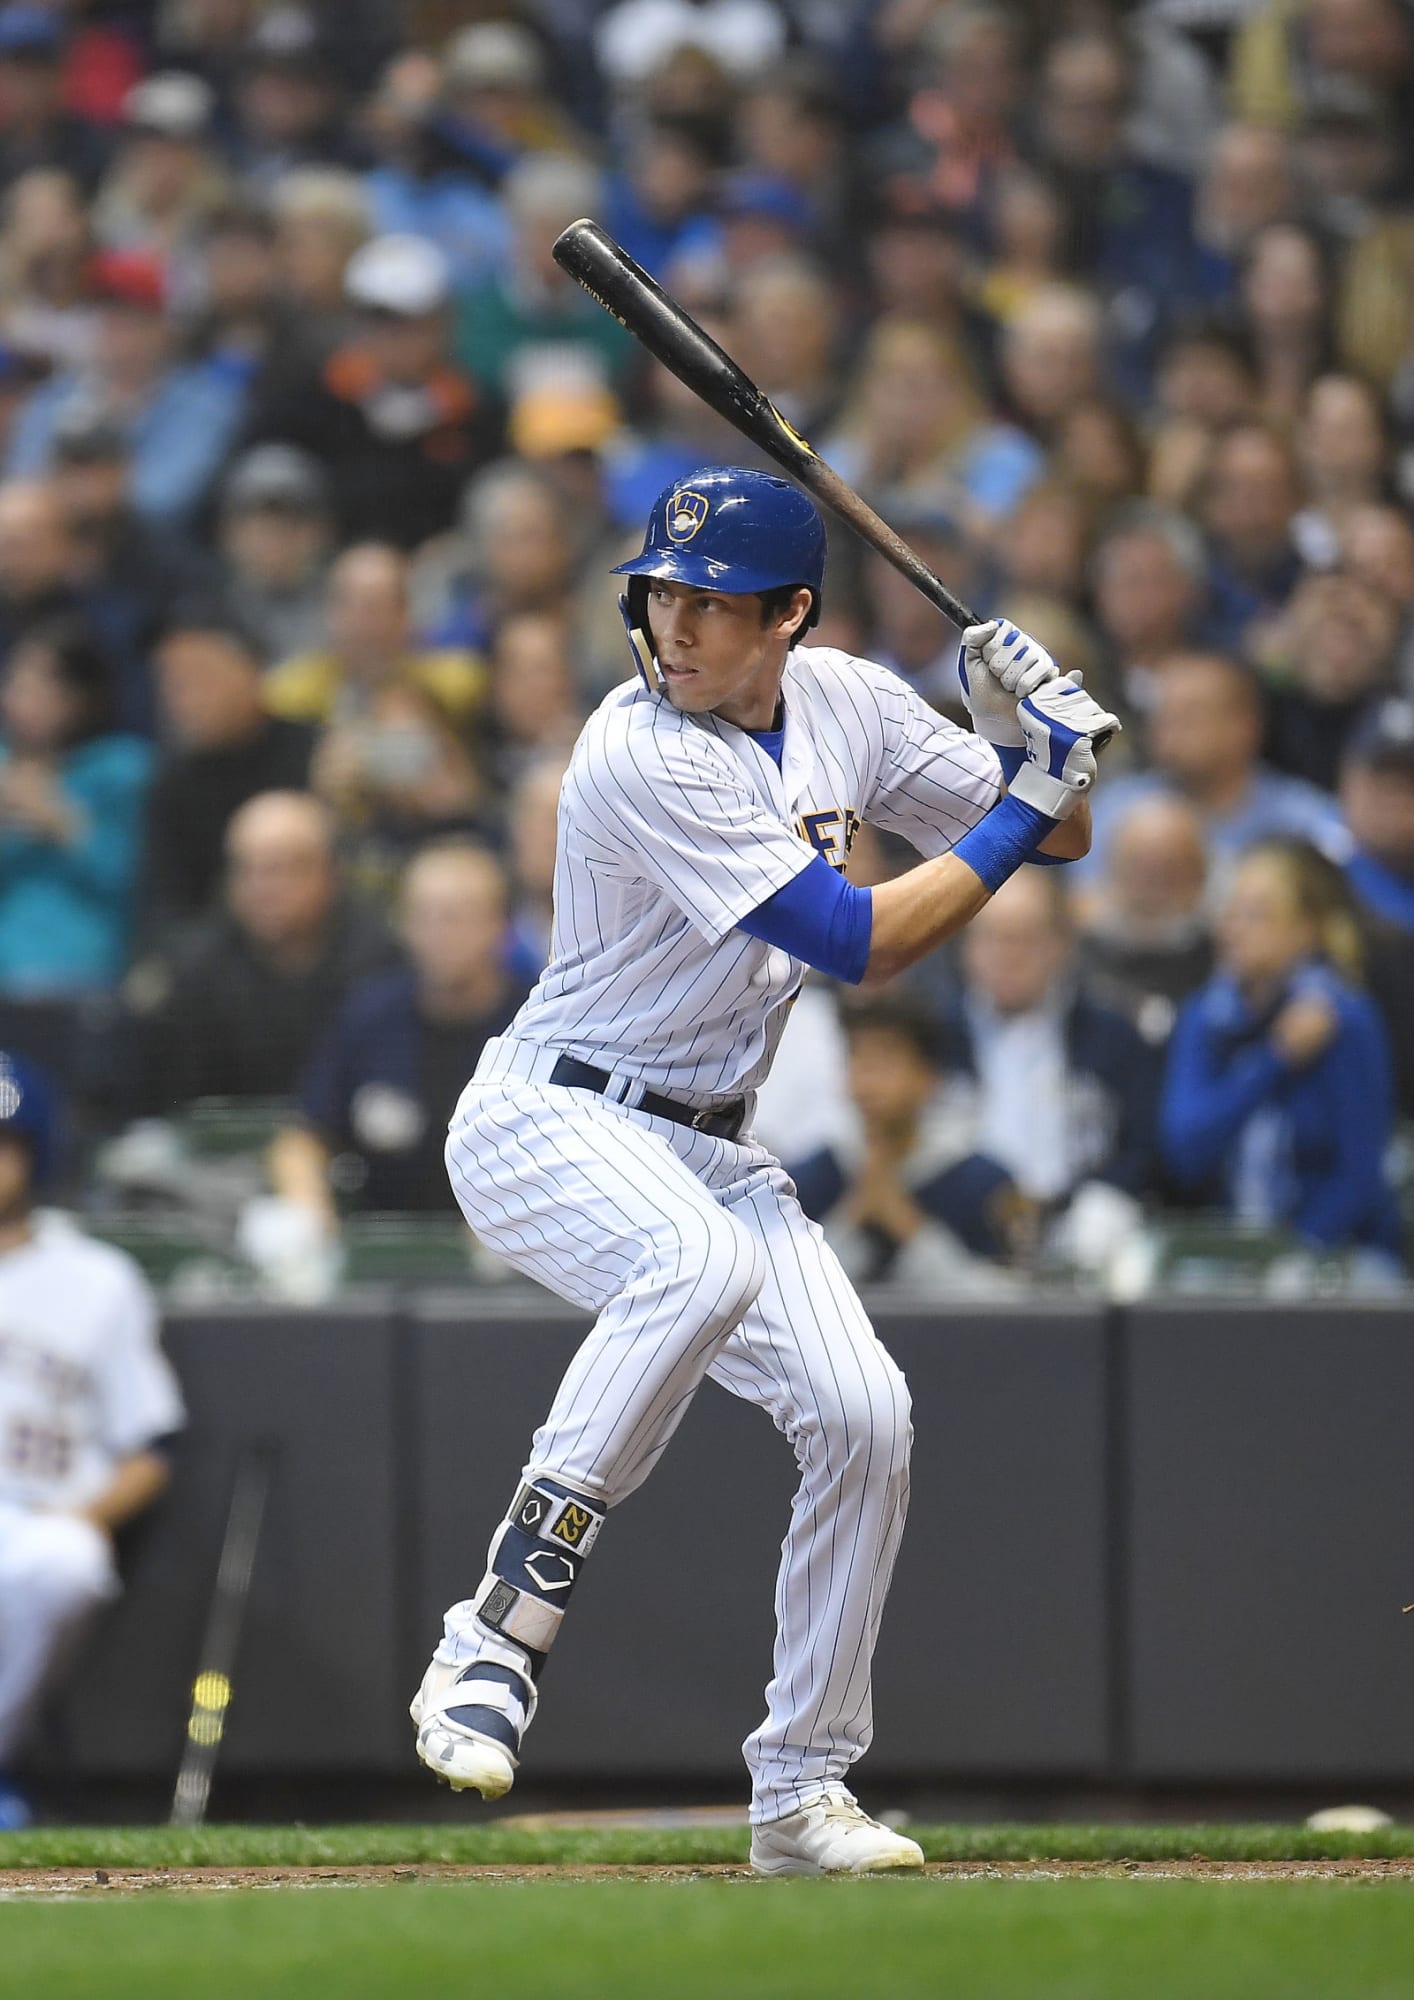 Christian Yelich: Bucking the Trend in the Era of the Launch Angle